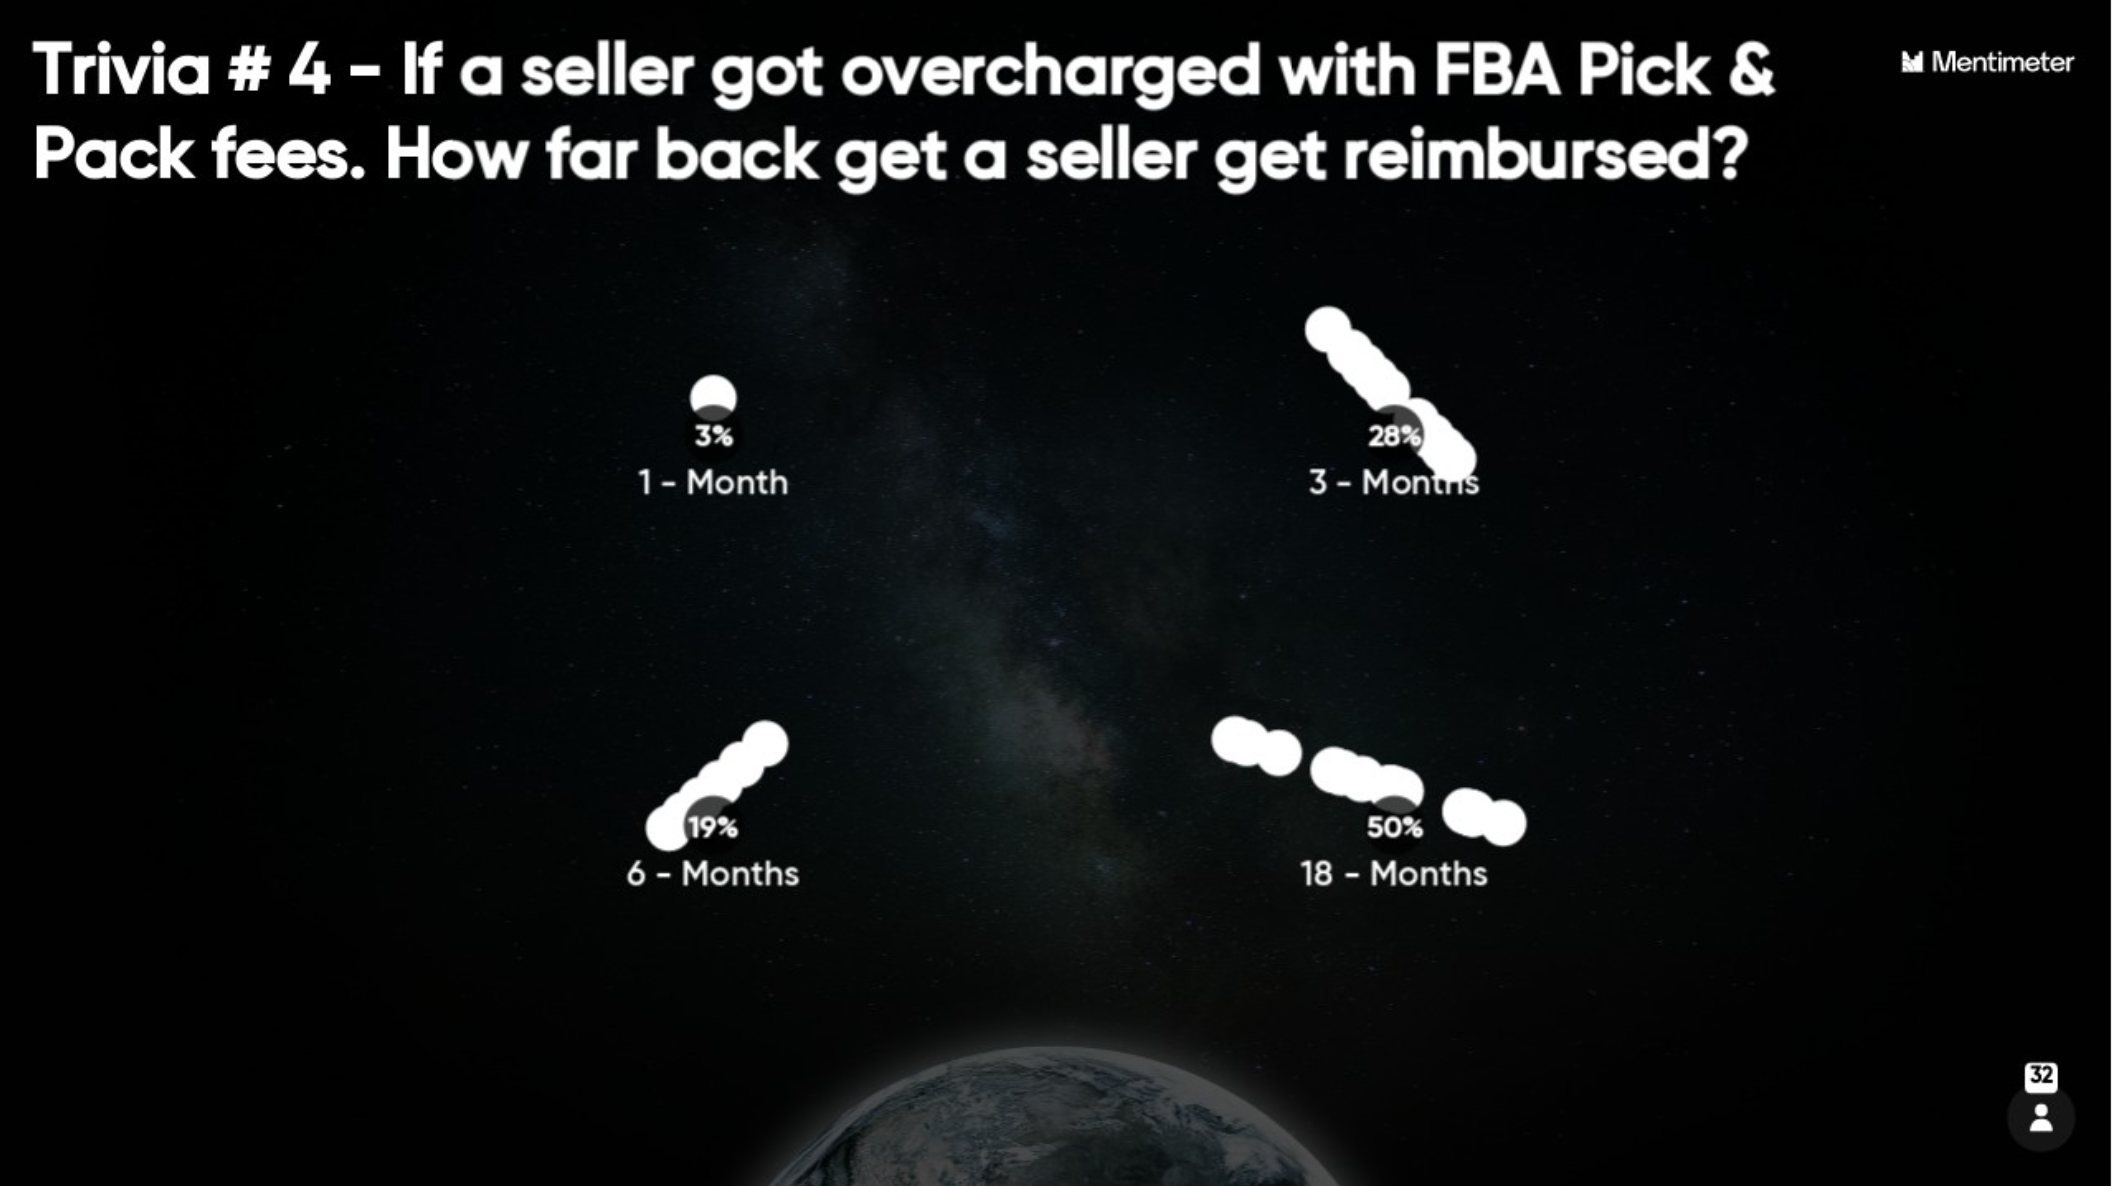 Trivia: If a seller got overcharged with FBA Pick & Pack fees, how far back can a seller get reimbursed?